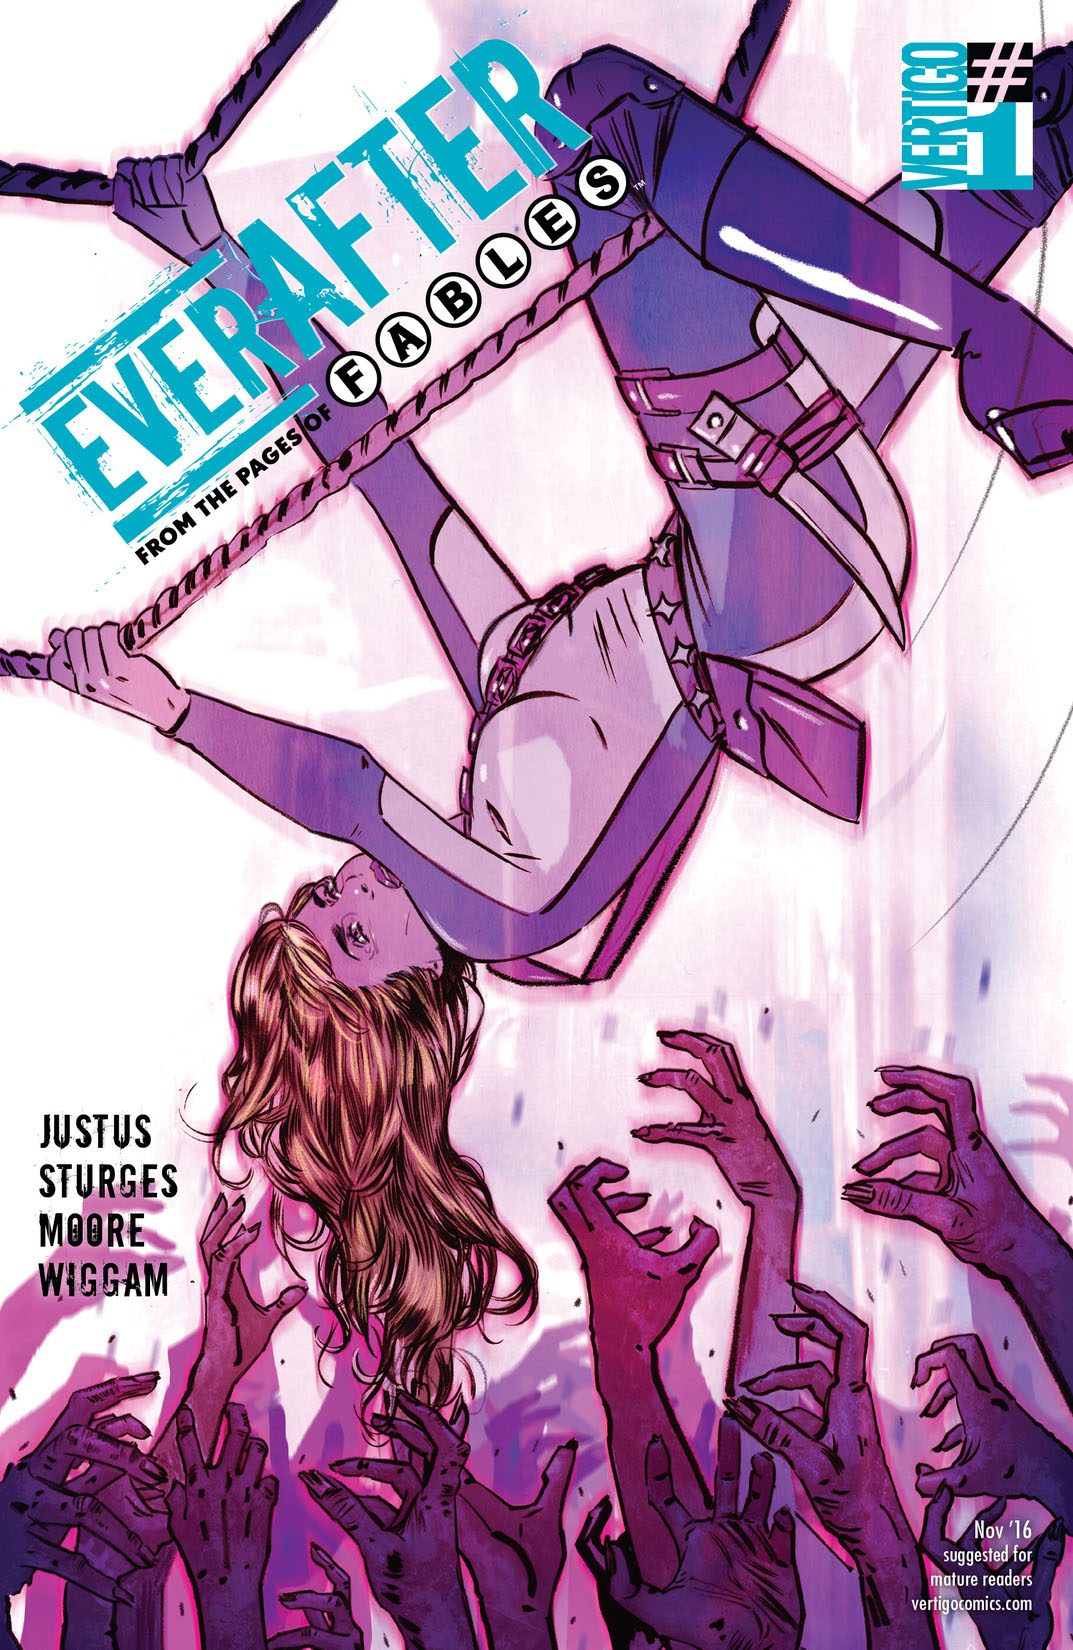 Everafter: From the Pages of Fables #1 preview images